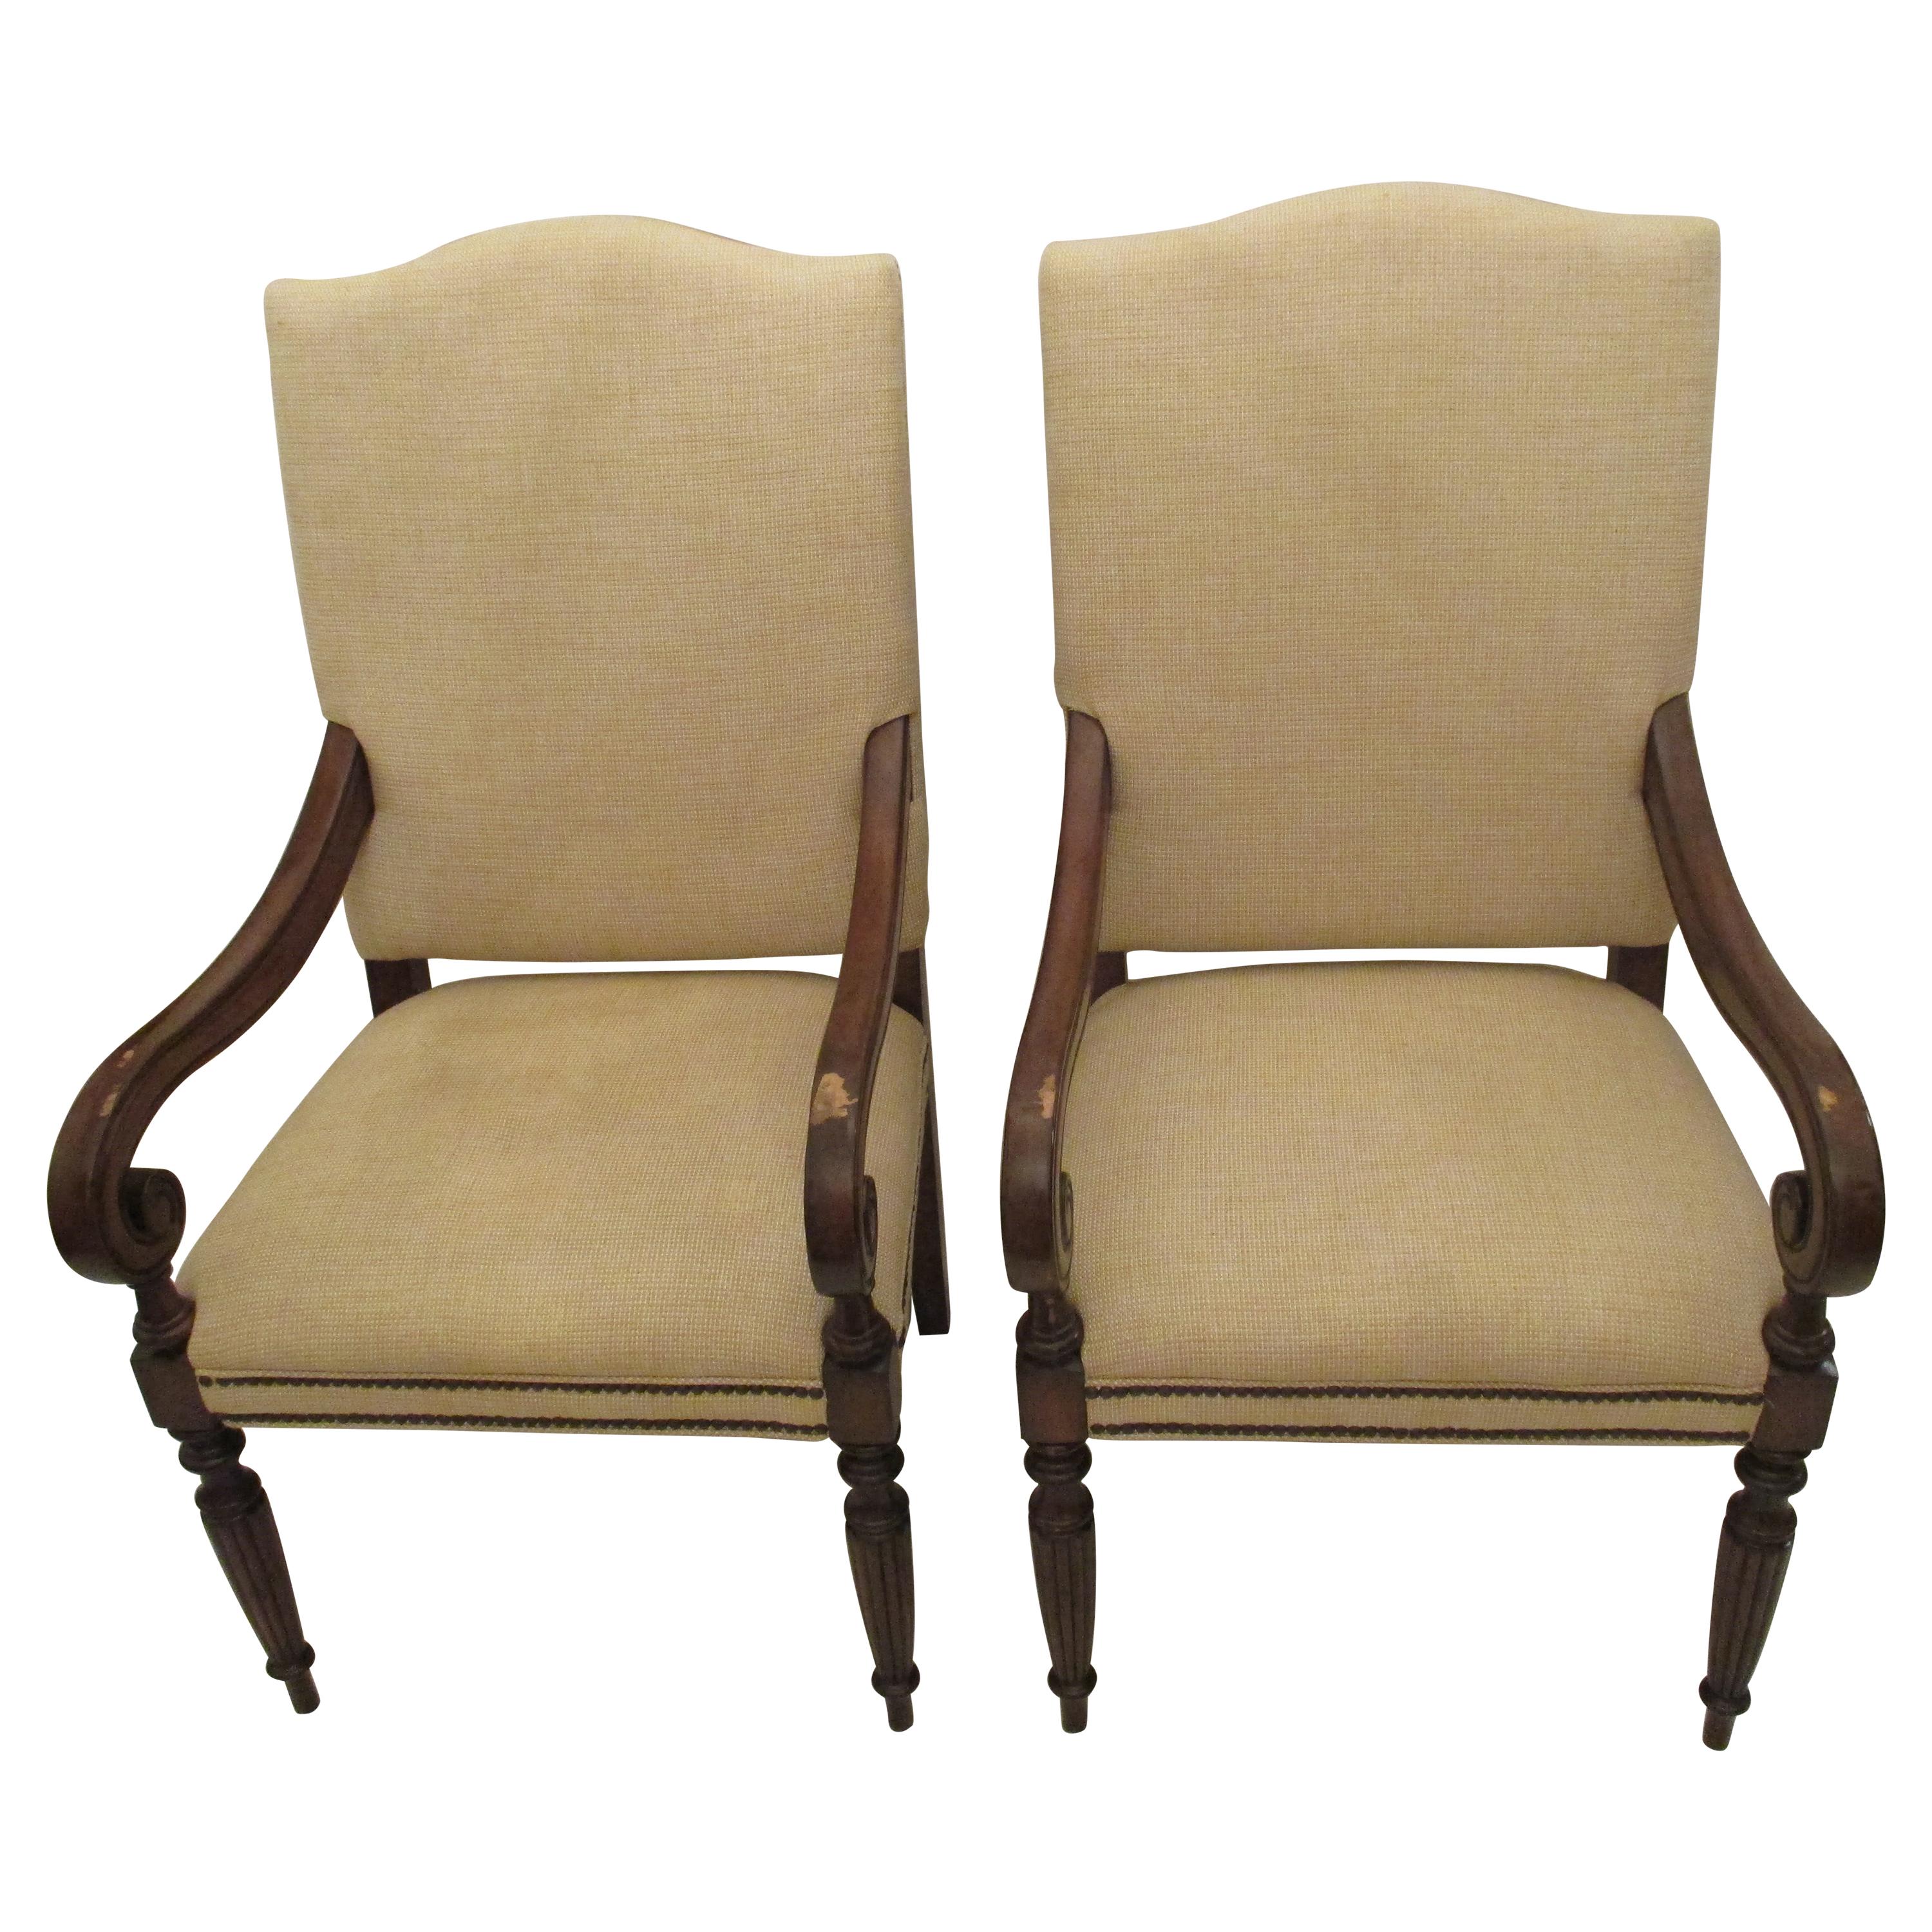 Pair of Upholstered Armchairs with Nailhead Trim